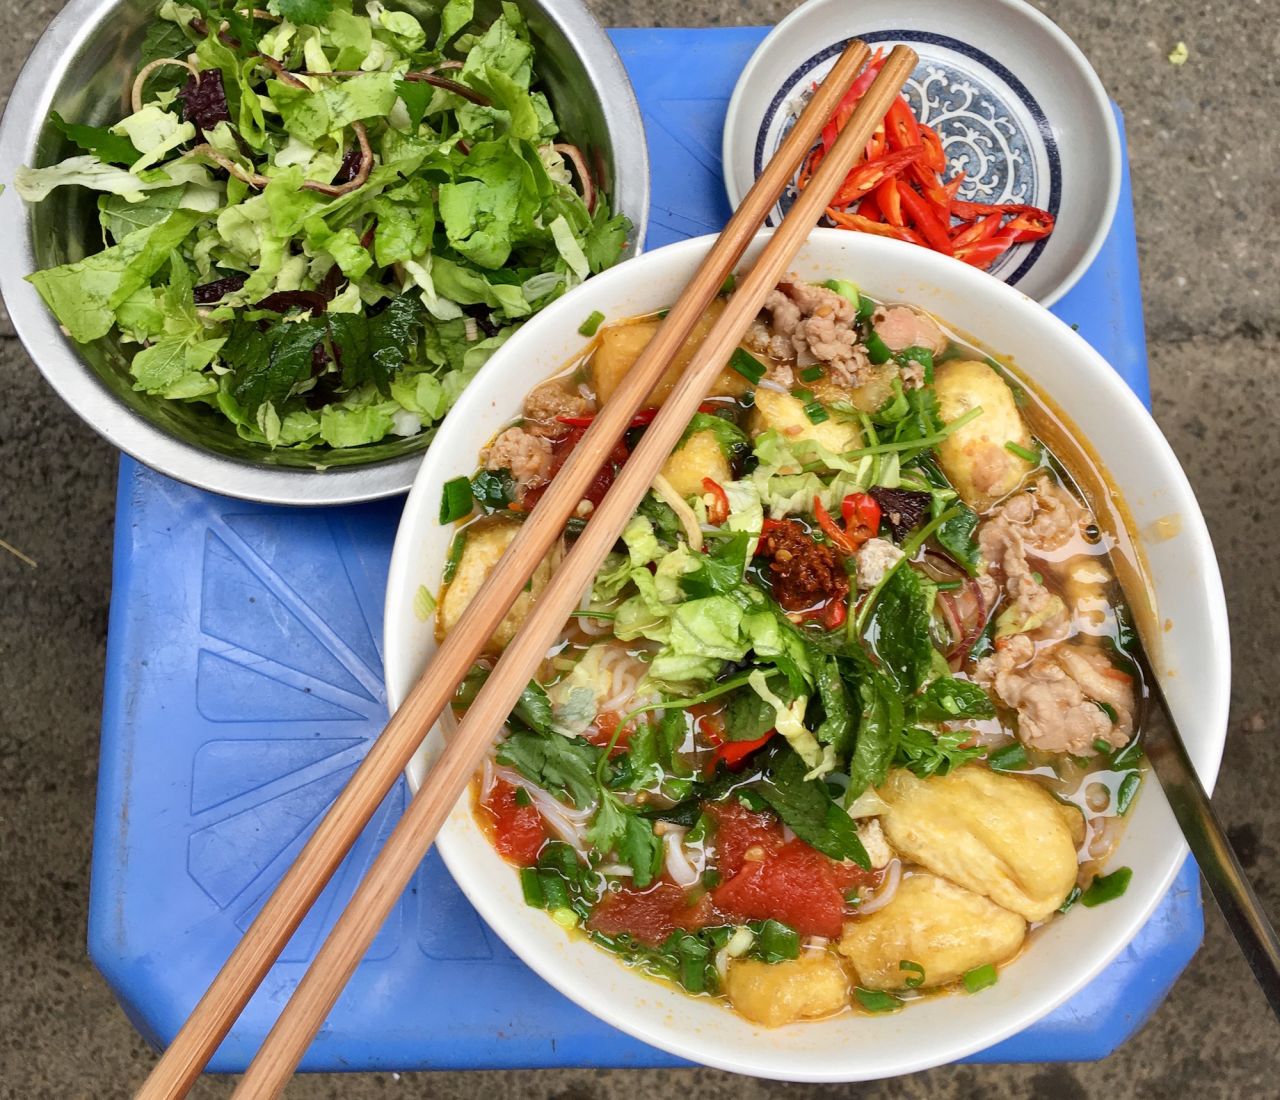 The first thing you'll notice about Bún riêu -- a meat or seafood vermicelli soup -- is its red hue.